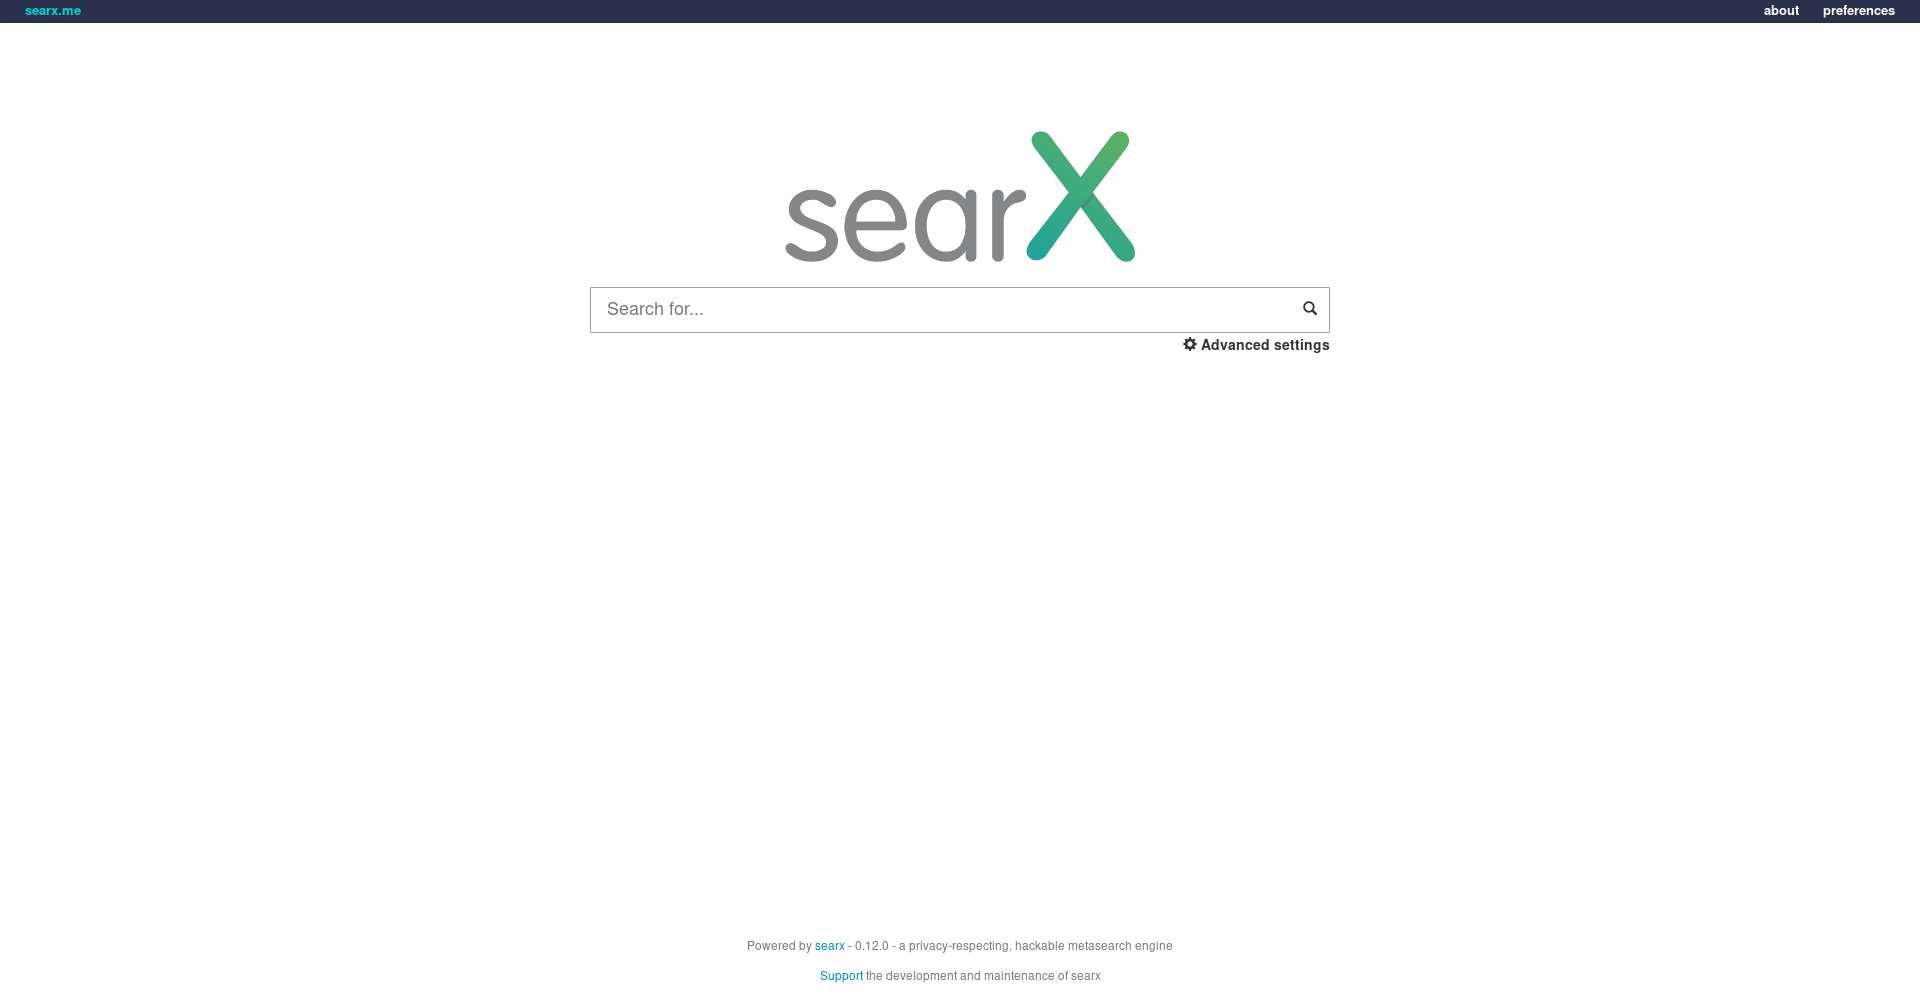 The homepage of Searx.com